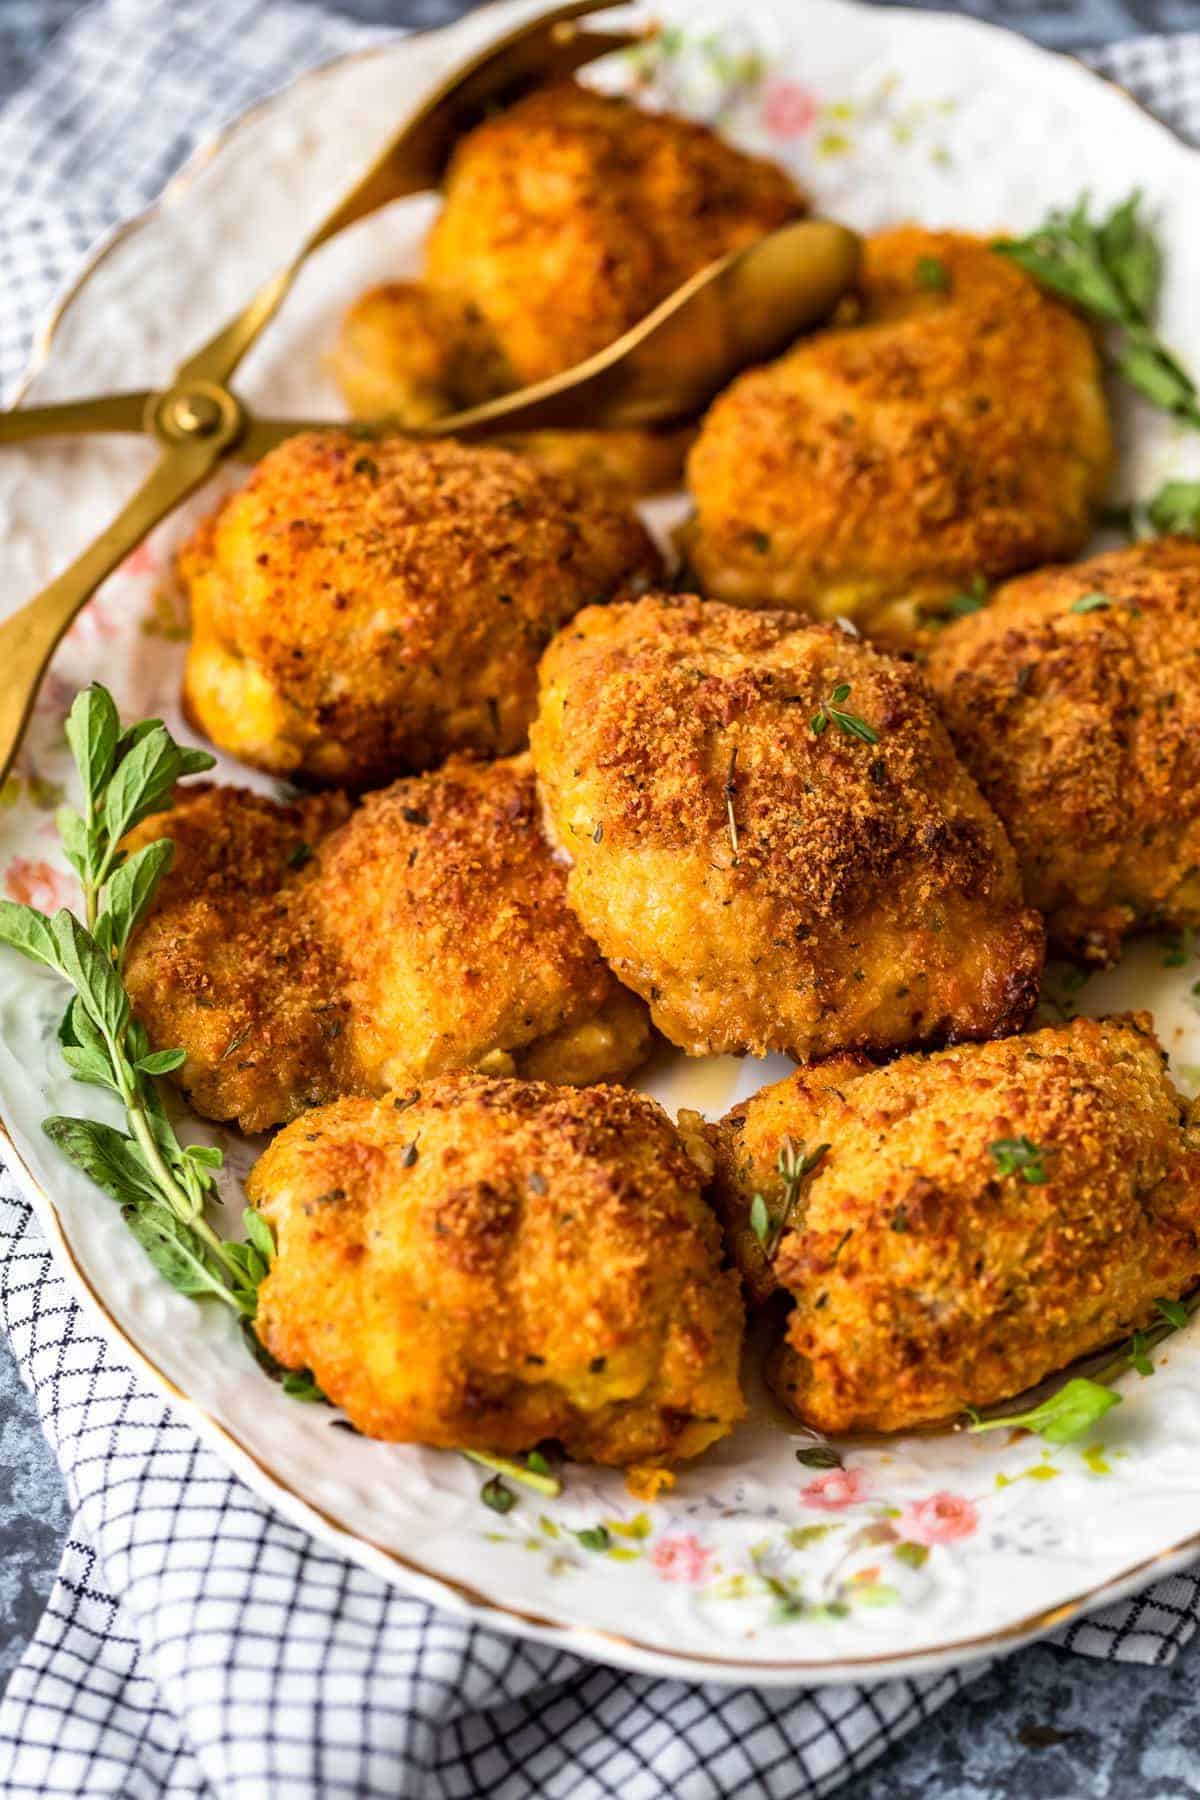 a plate of parmesan crusted chicken thighs, coated in a crispy breading